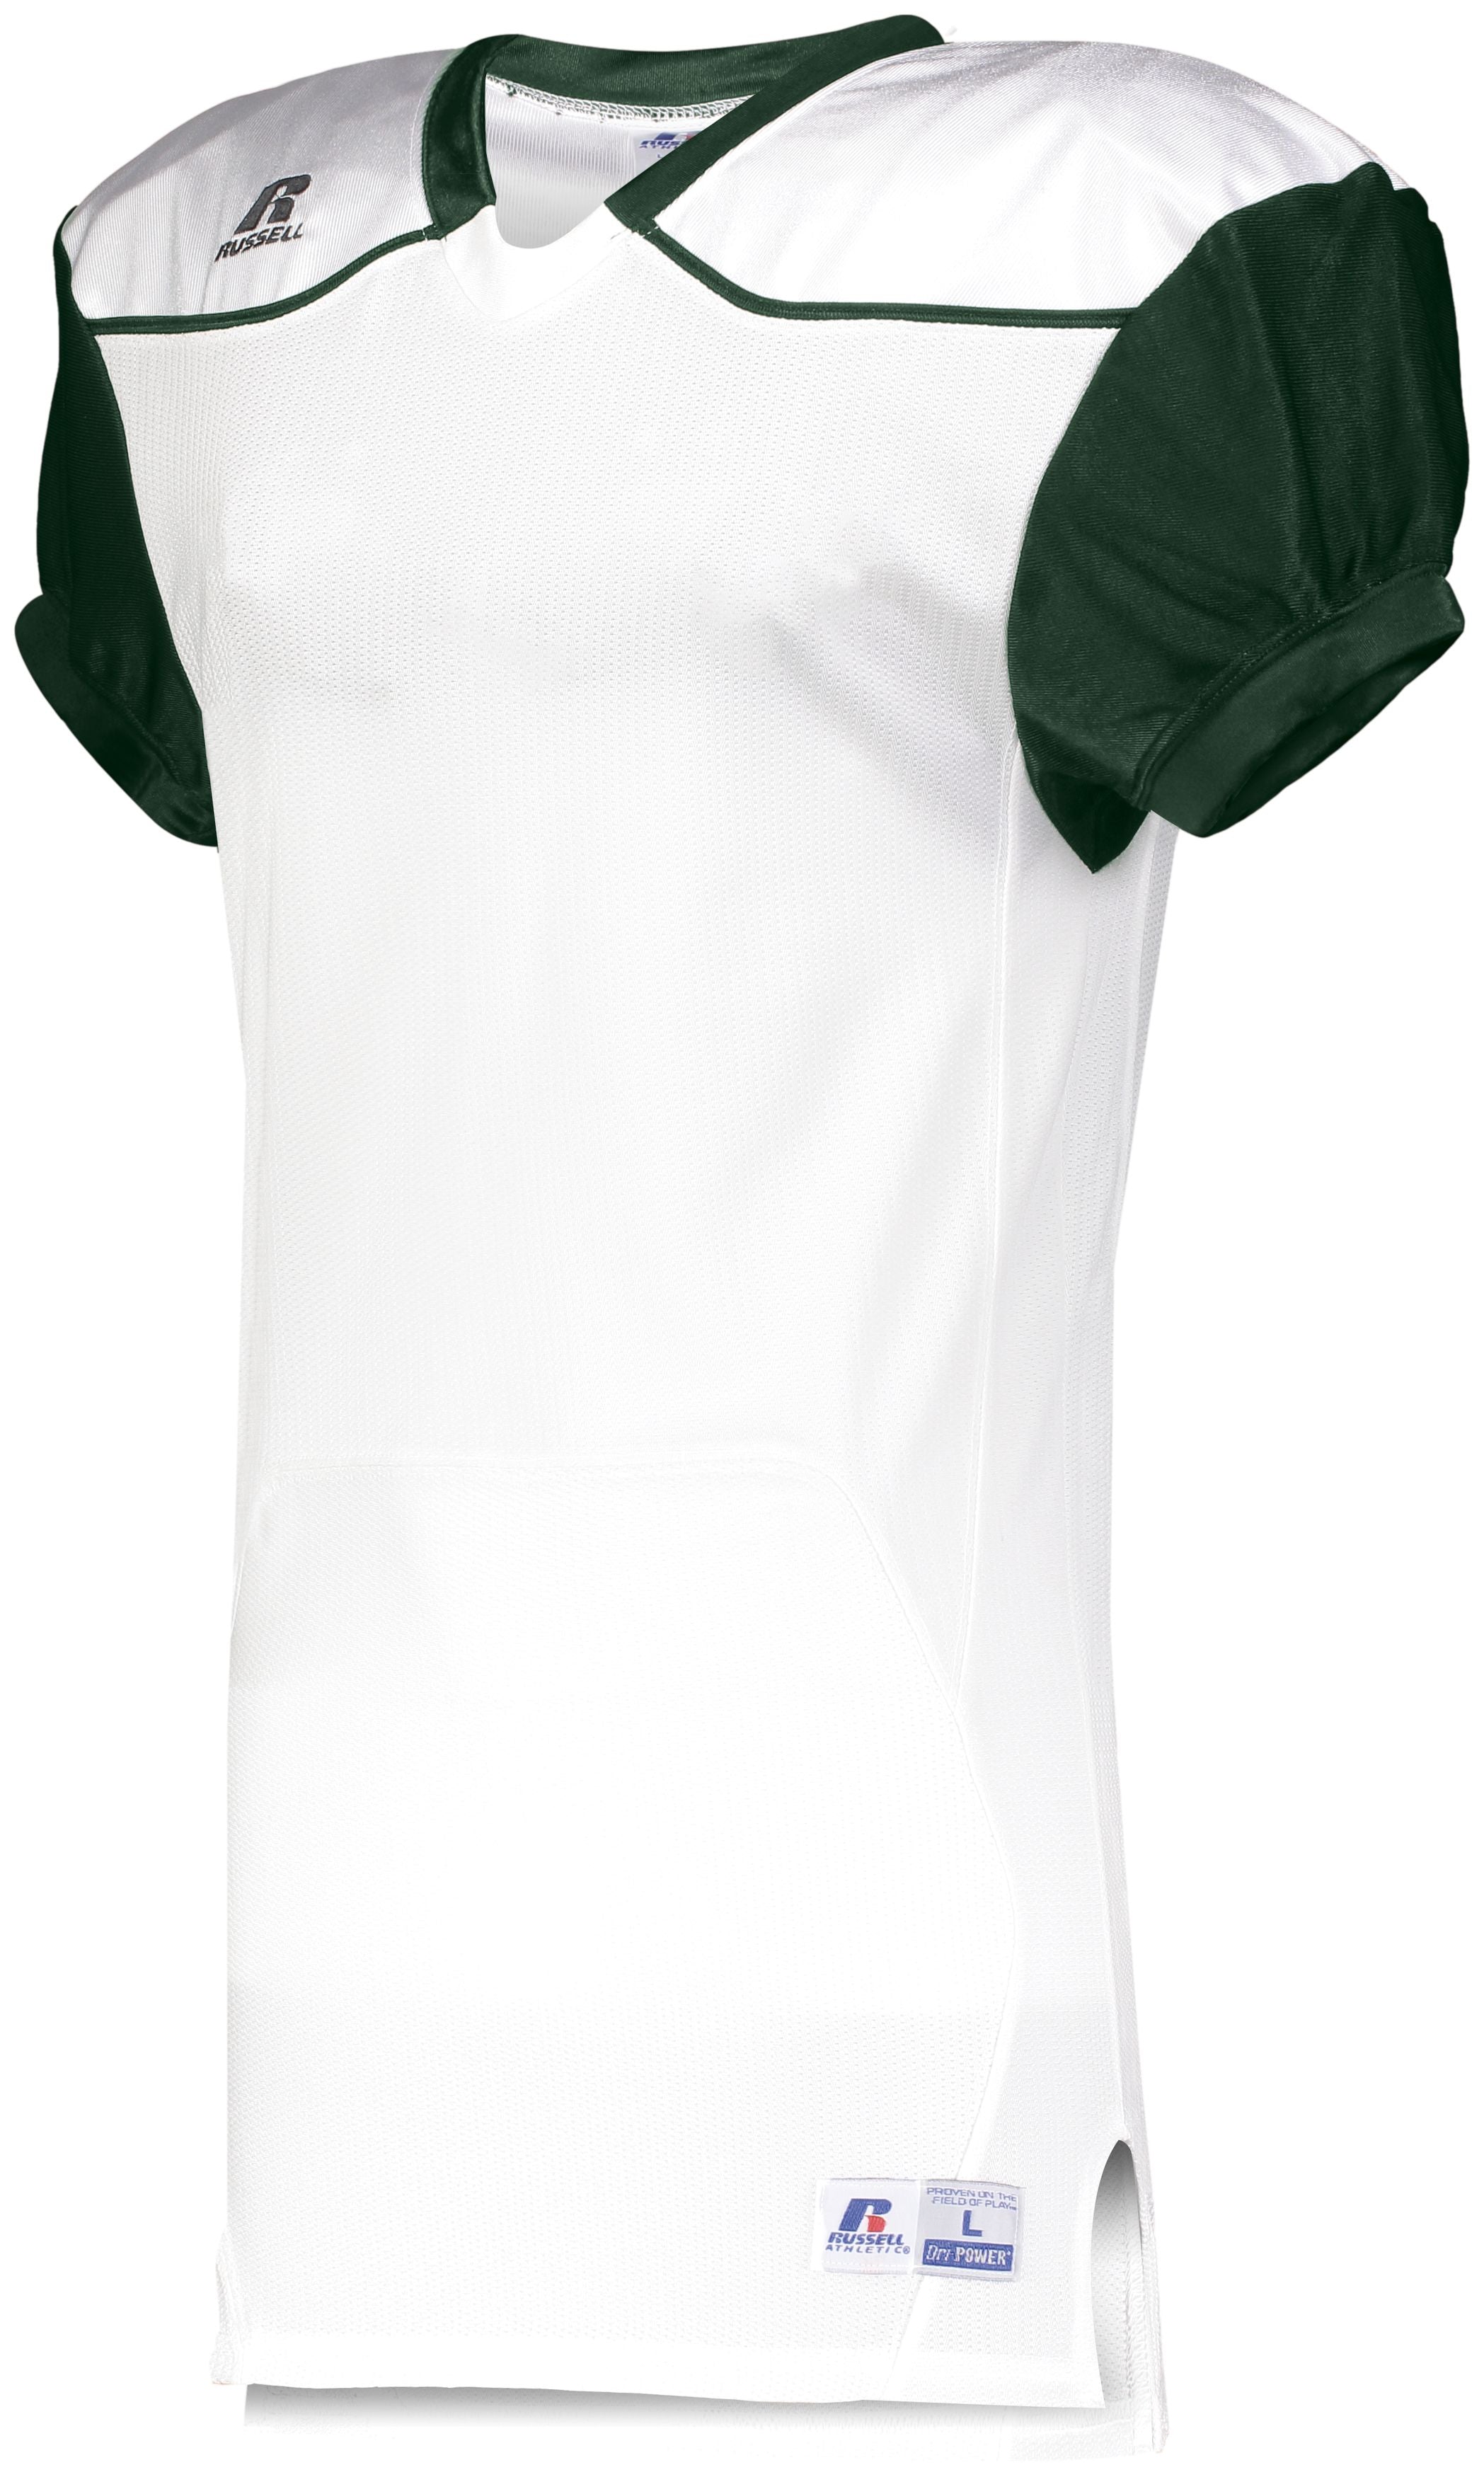 Russell Athletic Color Block Game Jersey (Away) in White/Dark Green  -Part of the Adult, Adult-Jersey, Football, Russell-Athletic-Products, Shirts, All-Sports, All-Sports-1 product lines at KanaleyCreations.com